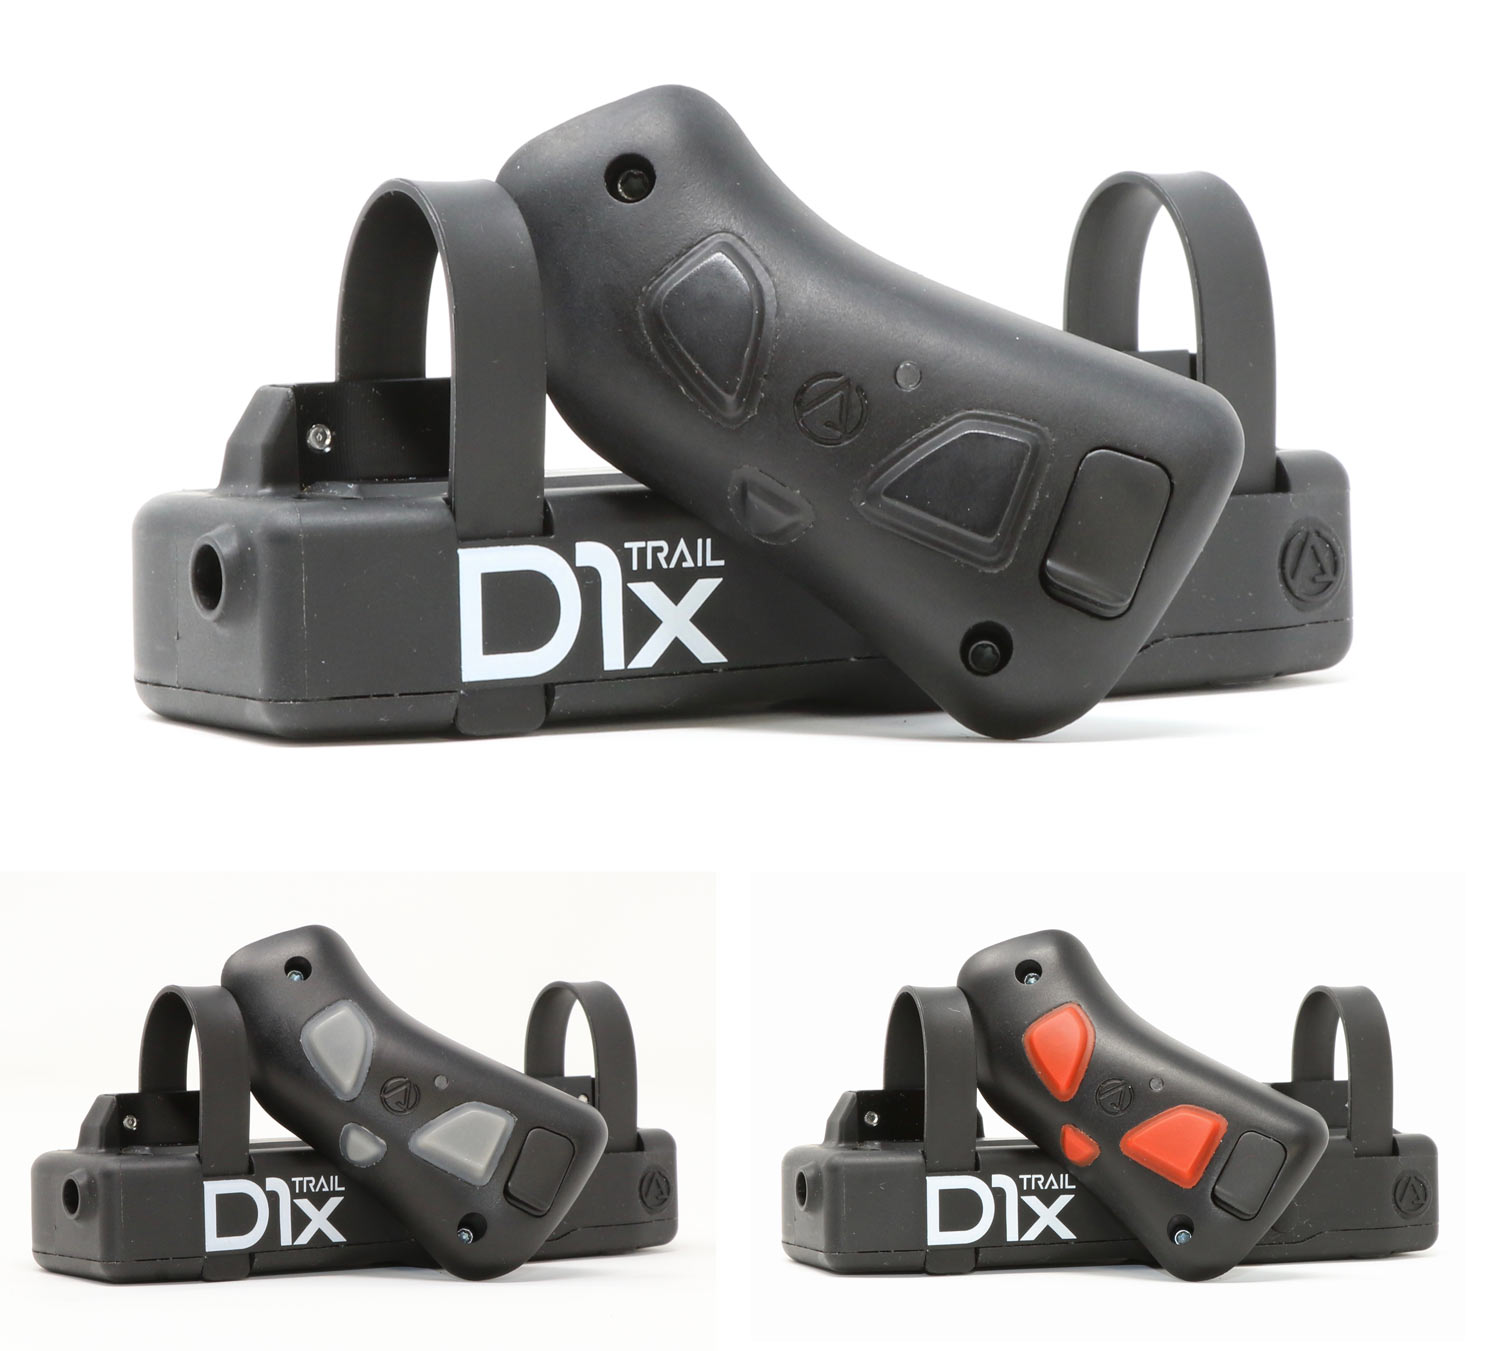 archer d1x and dbr wireless shifting kit for road bikes and gravel bikes with drop bars